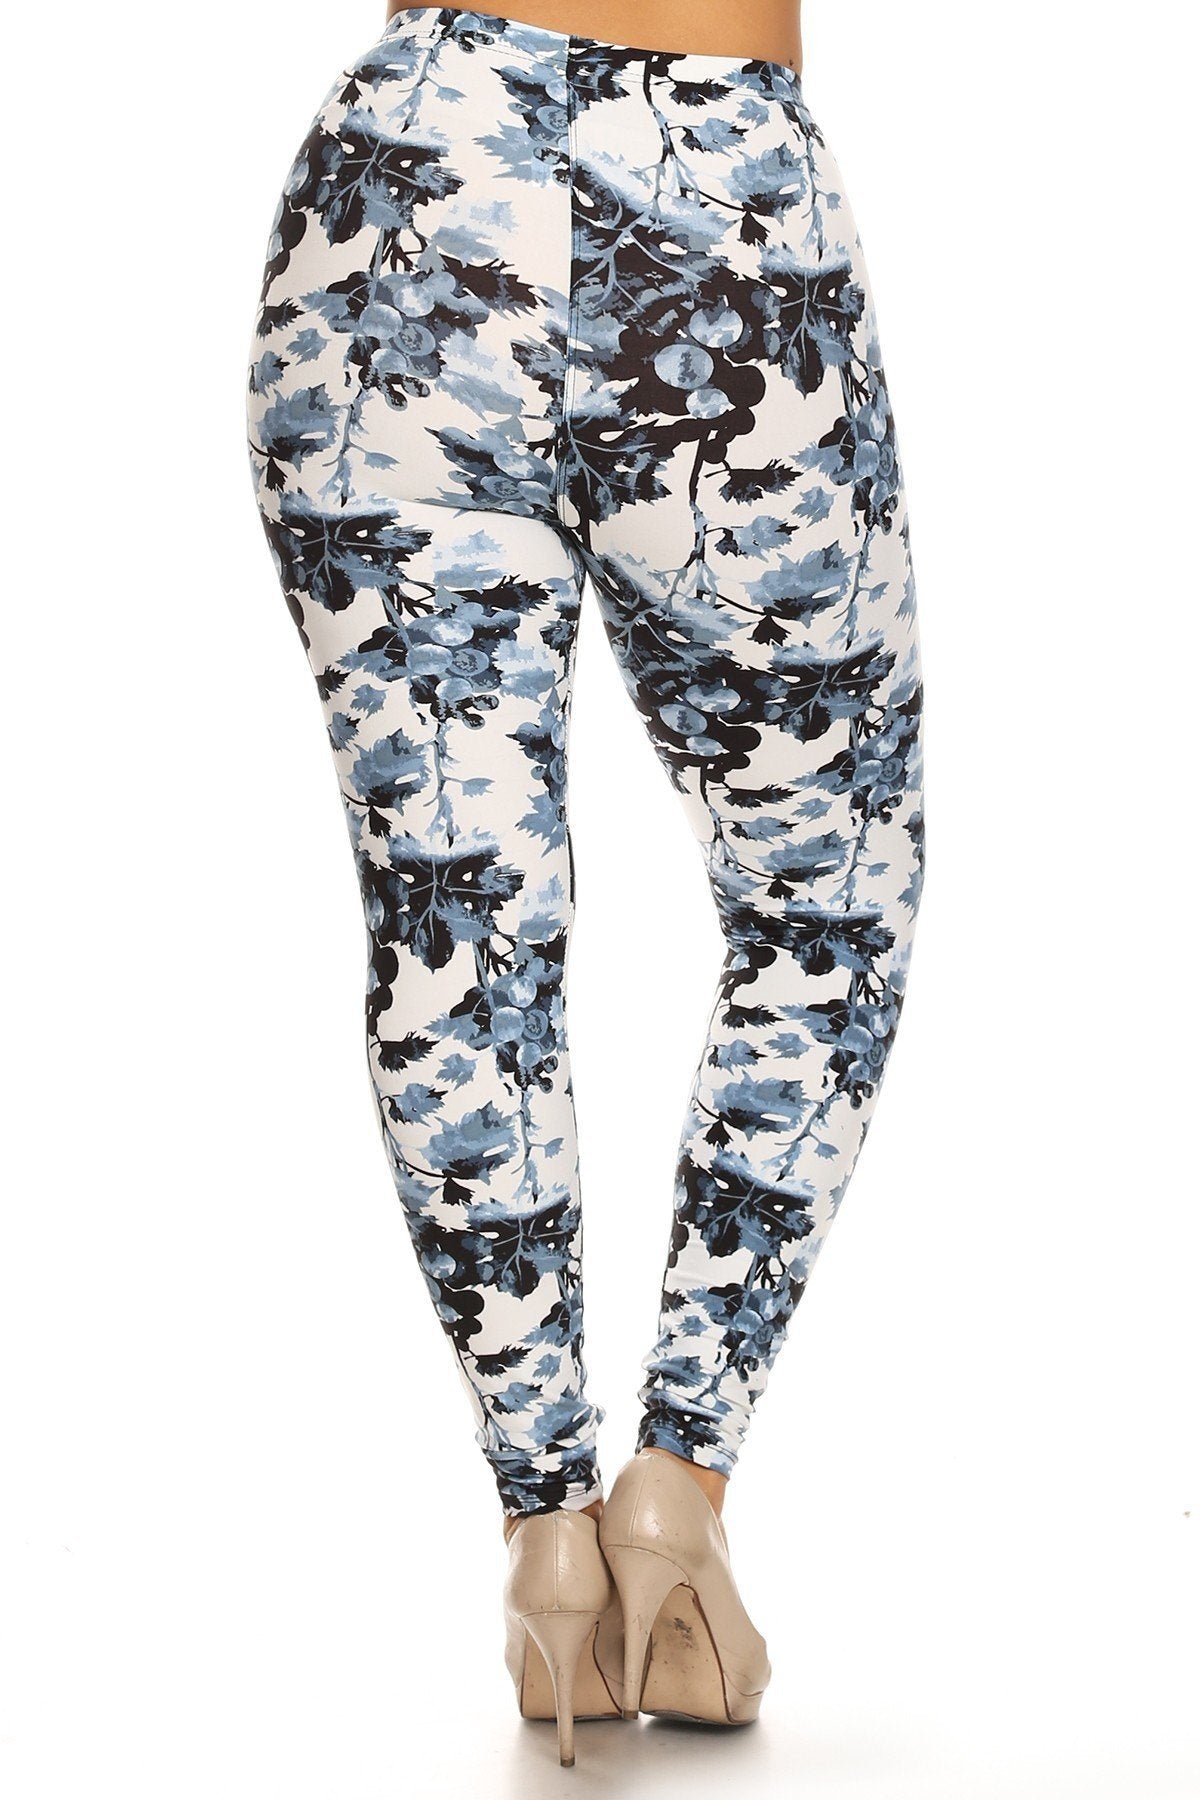 Plus Size Floral Print, Full Length Leggings In A Slim Fitting Style With A Banded High Waist Plus Size Floral Print, Full Length Leggings In A Slim Fitting Style With A Banded High Waist - M&R CORNER M&R CORNER